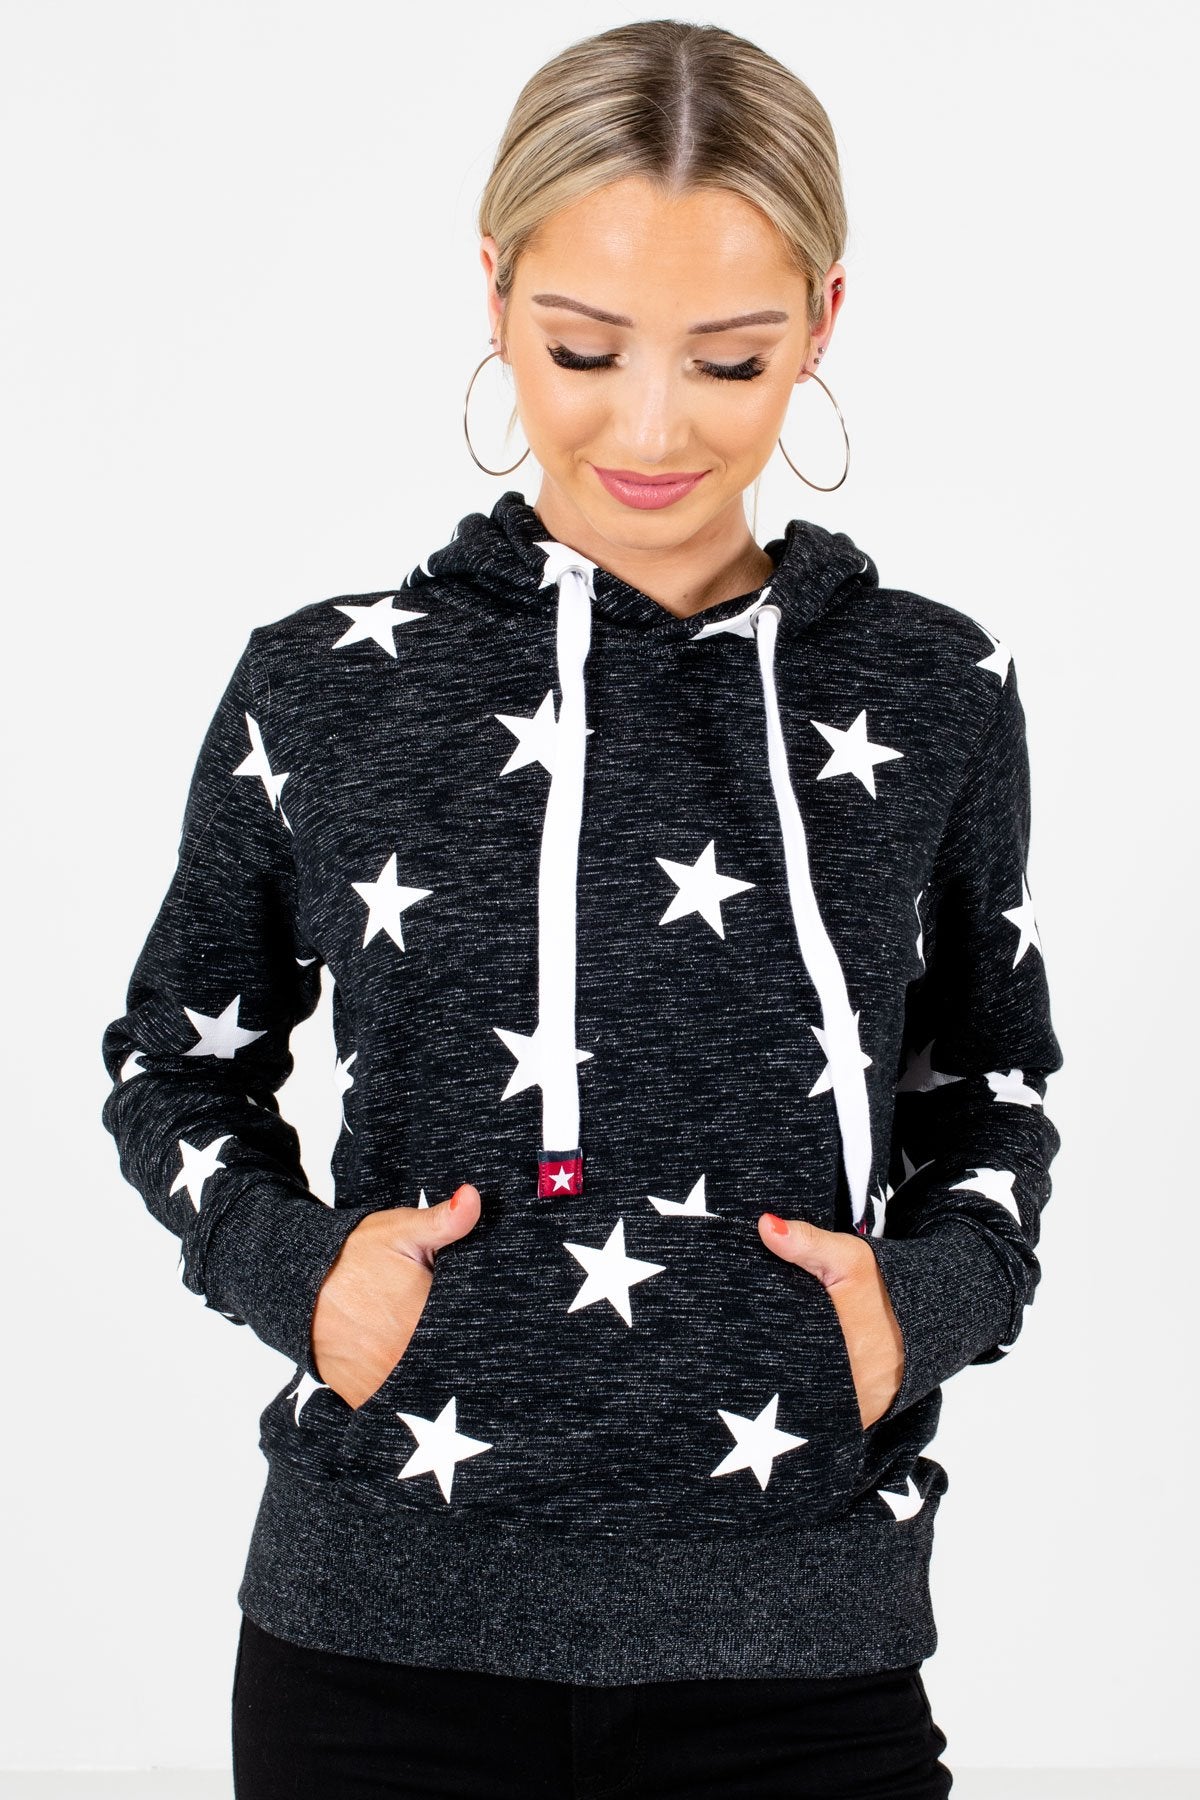 Women’s Heather Black Warm and Cozy Boutique Hoodies